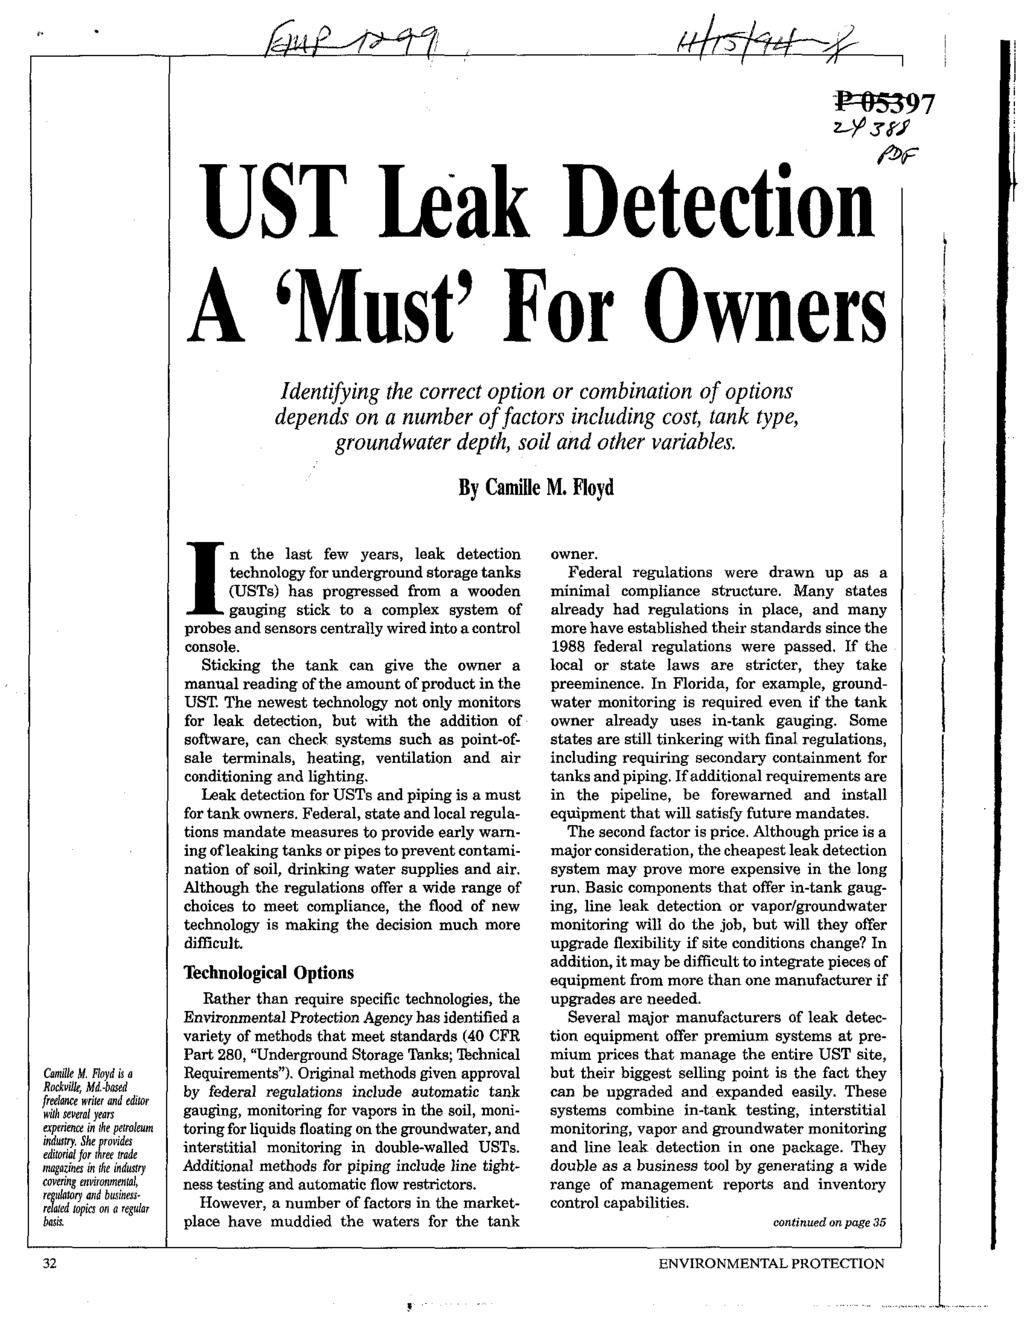 UST Leak Detection A 'Must' For Owners Identifying the correct option or combination of options depends on a number of factors including cost, tank type, groundwater depth, soil and other variables.